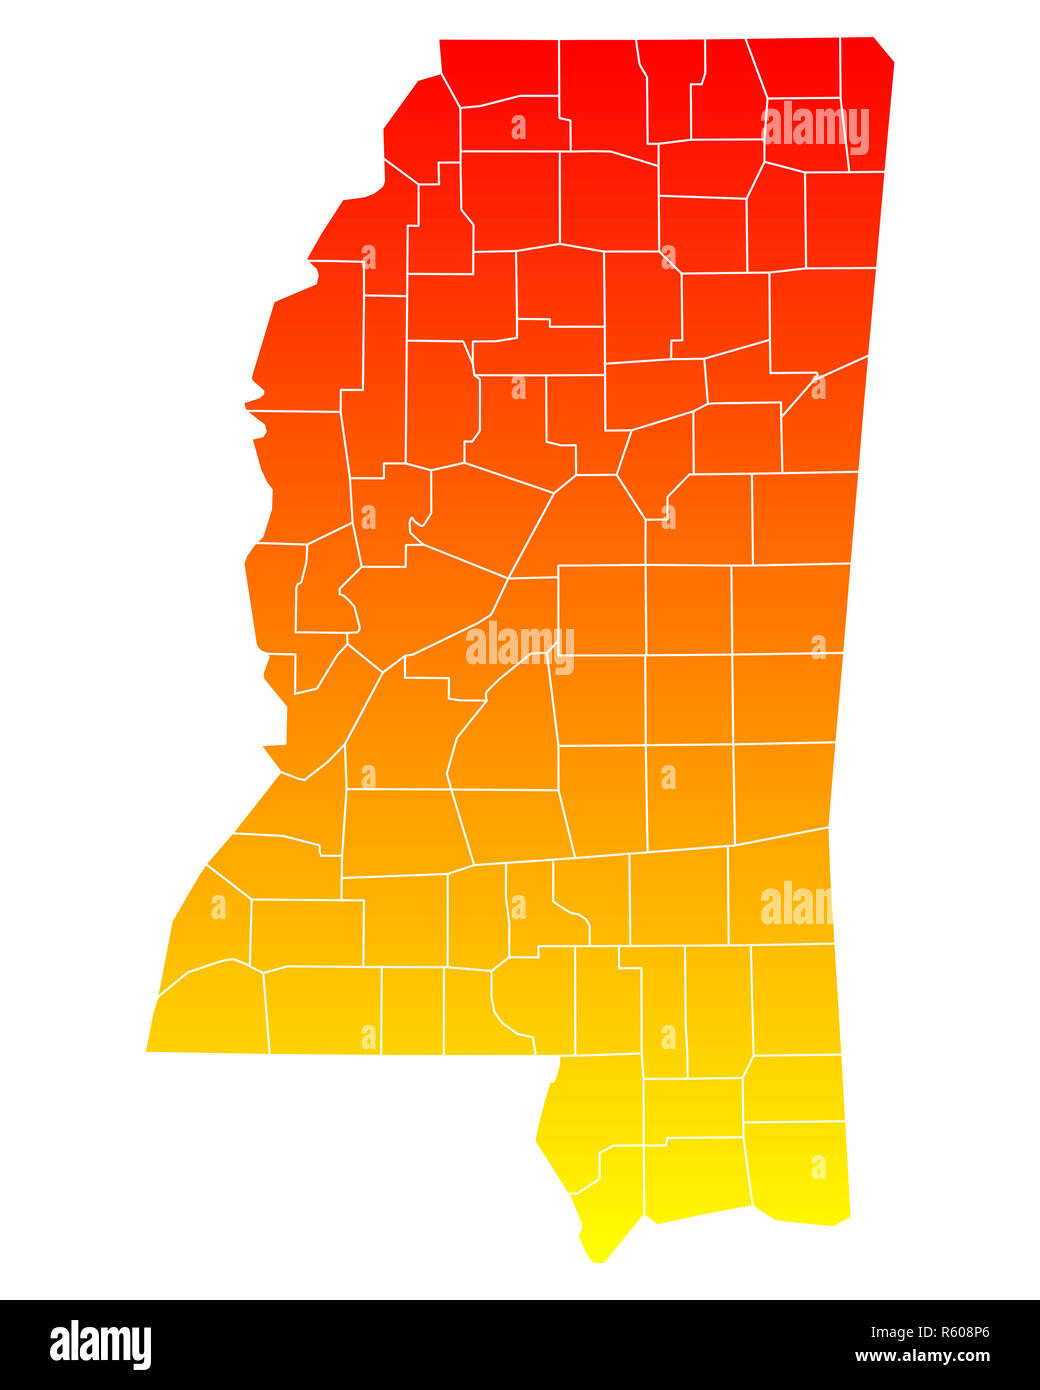 Map Of Mississippi R608P6 